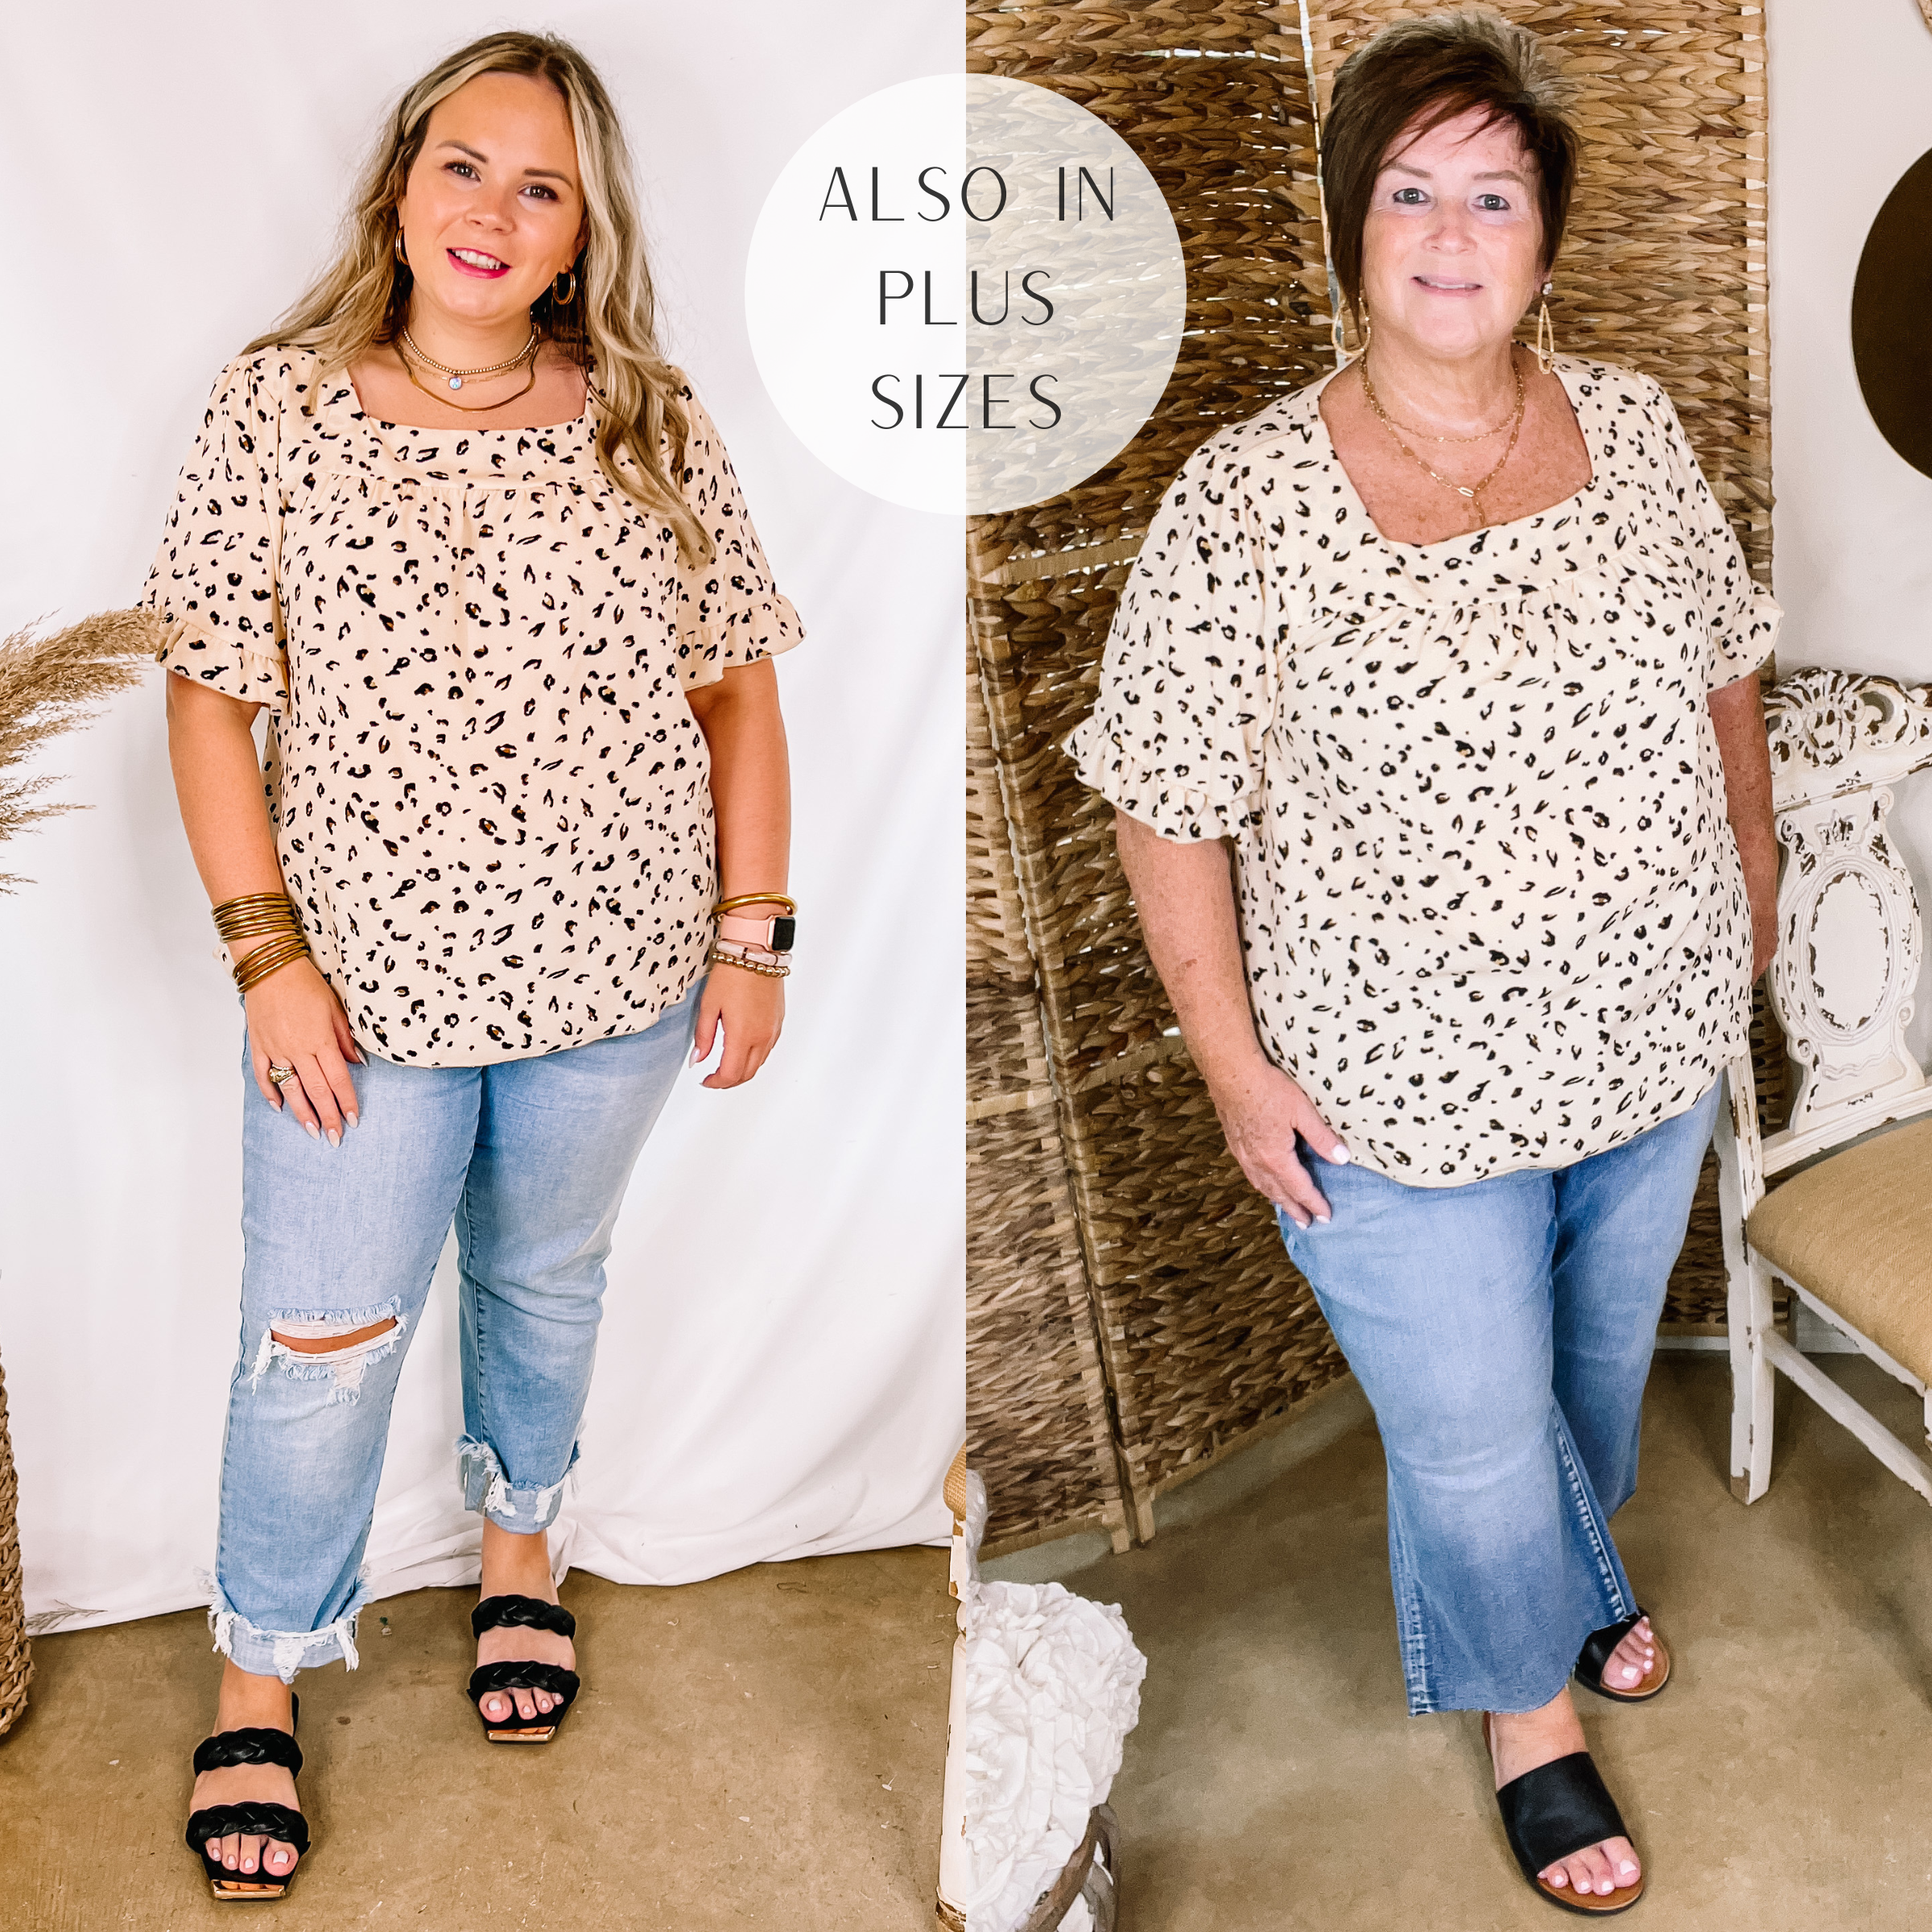 New Best Friend Square Neck Ruffle Short Sleeve Top in Leopard Print